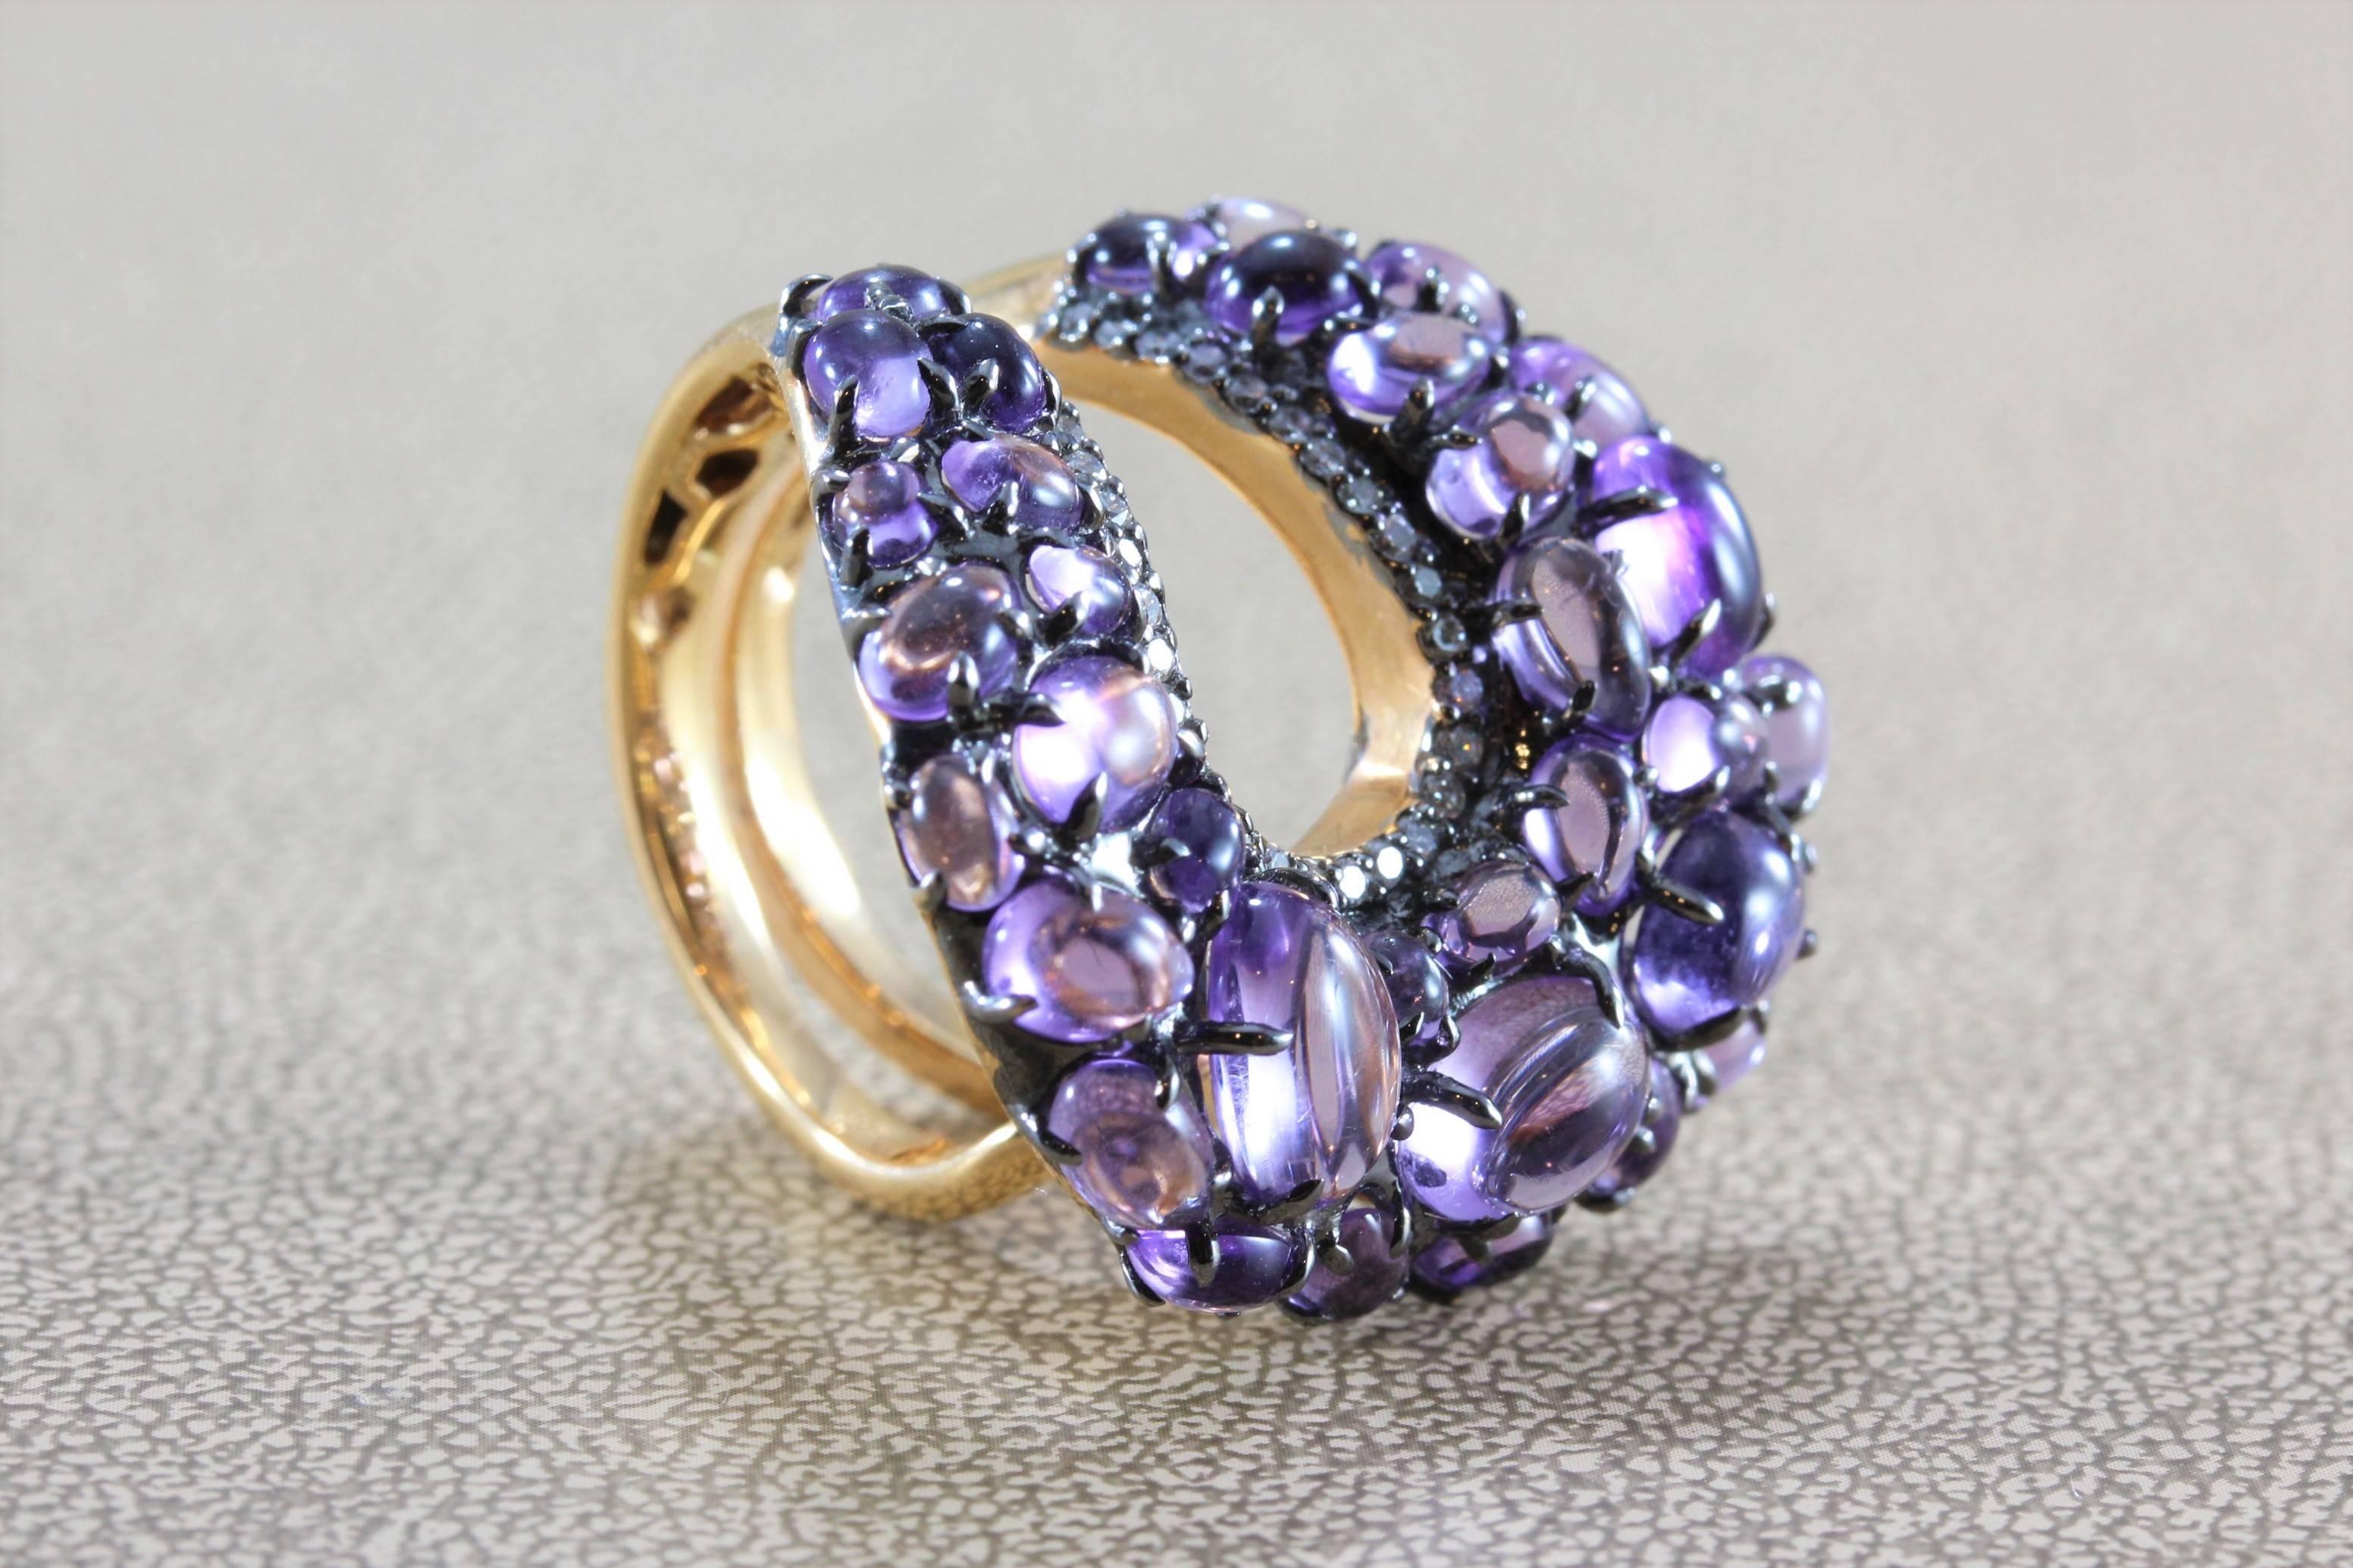 A fun and sexy ring featuring 8.60 carats of cabochon amethyst which are complemented by full-cut diamonds, all set in 18K rose gold.  

Dimensions: 1.10 x 1.00 inches
Ring size 7 (Sizable) 
